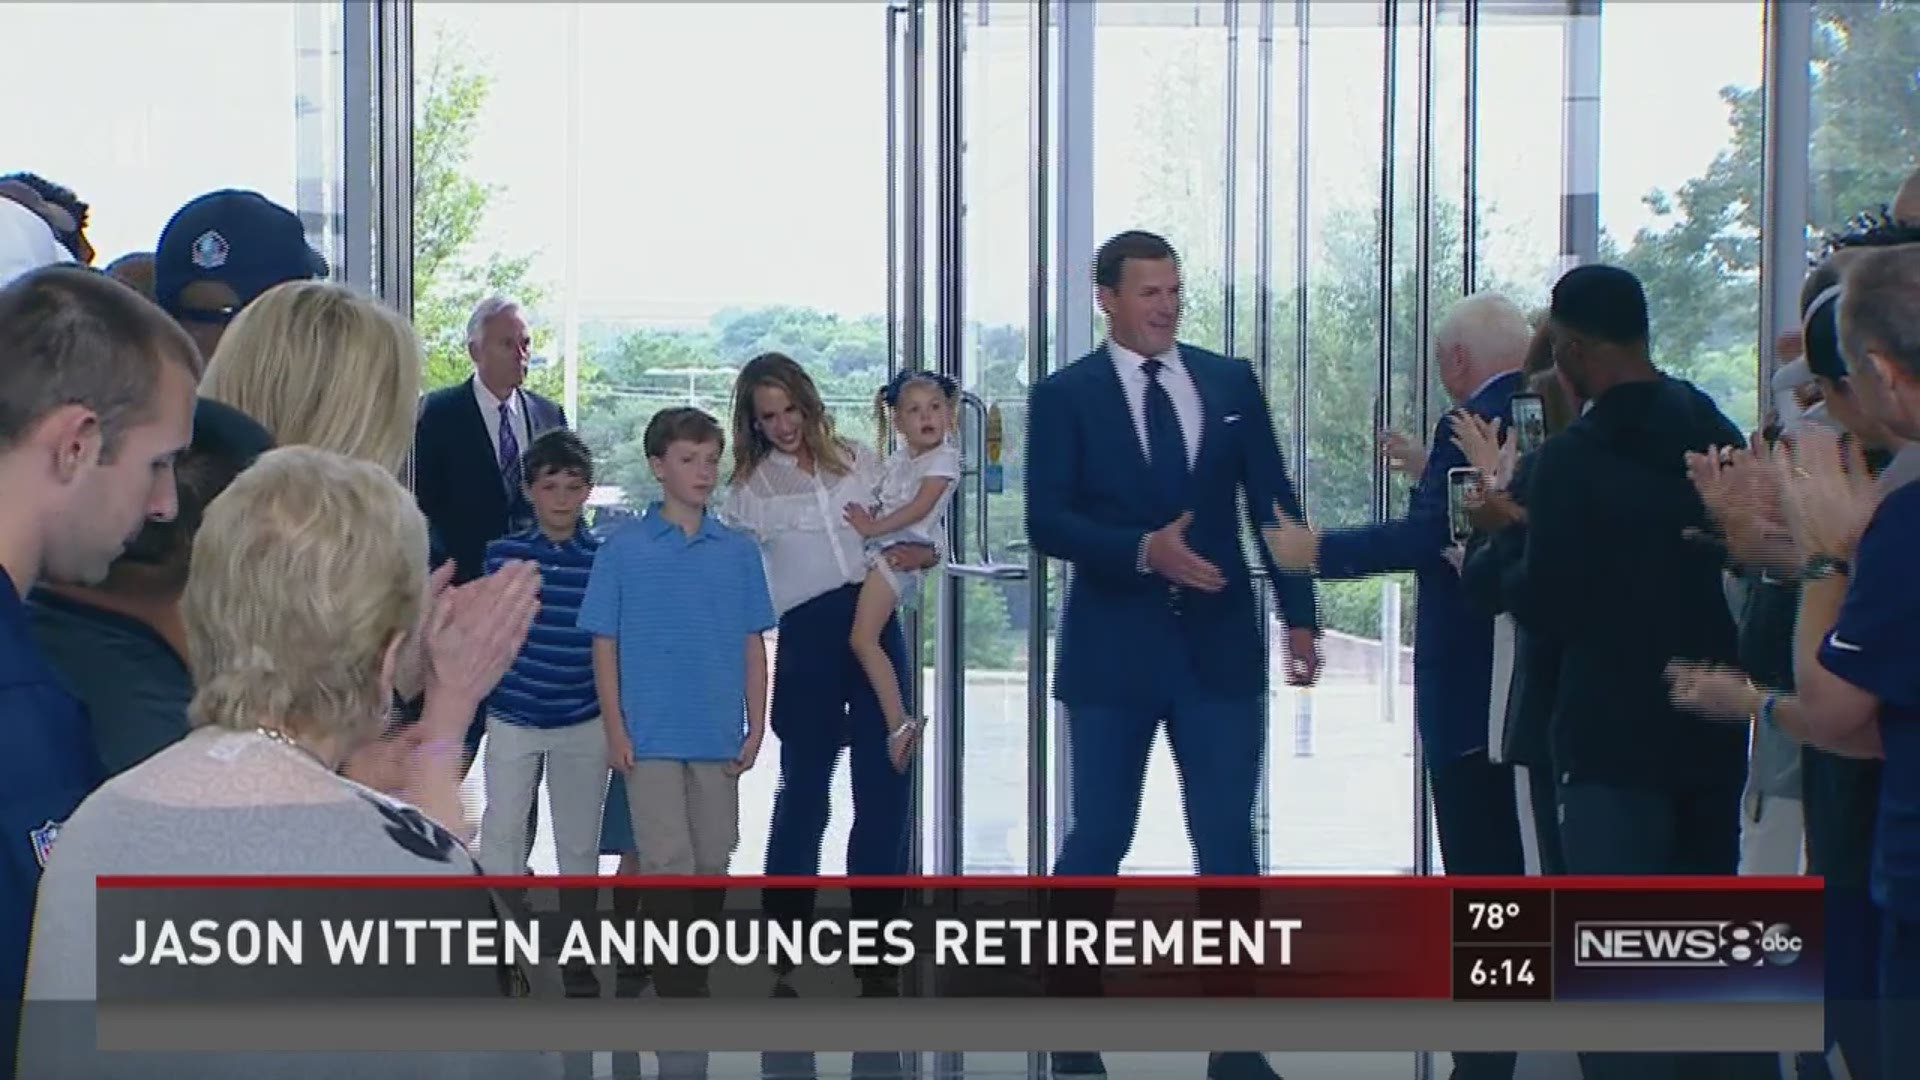 Jason Witten retired on Thursday, leaving a tremendous legacy with the Cowboys organization, both on the field and off.